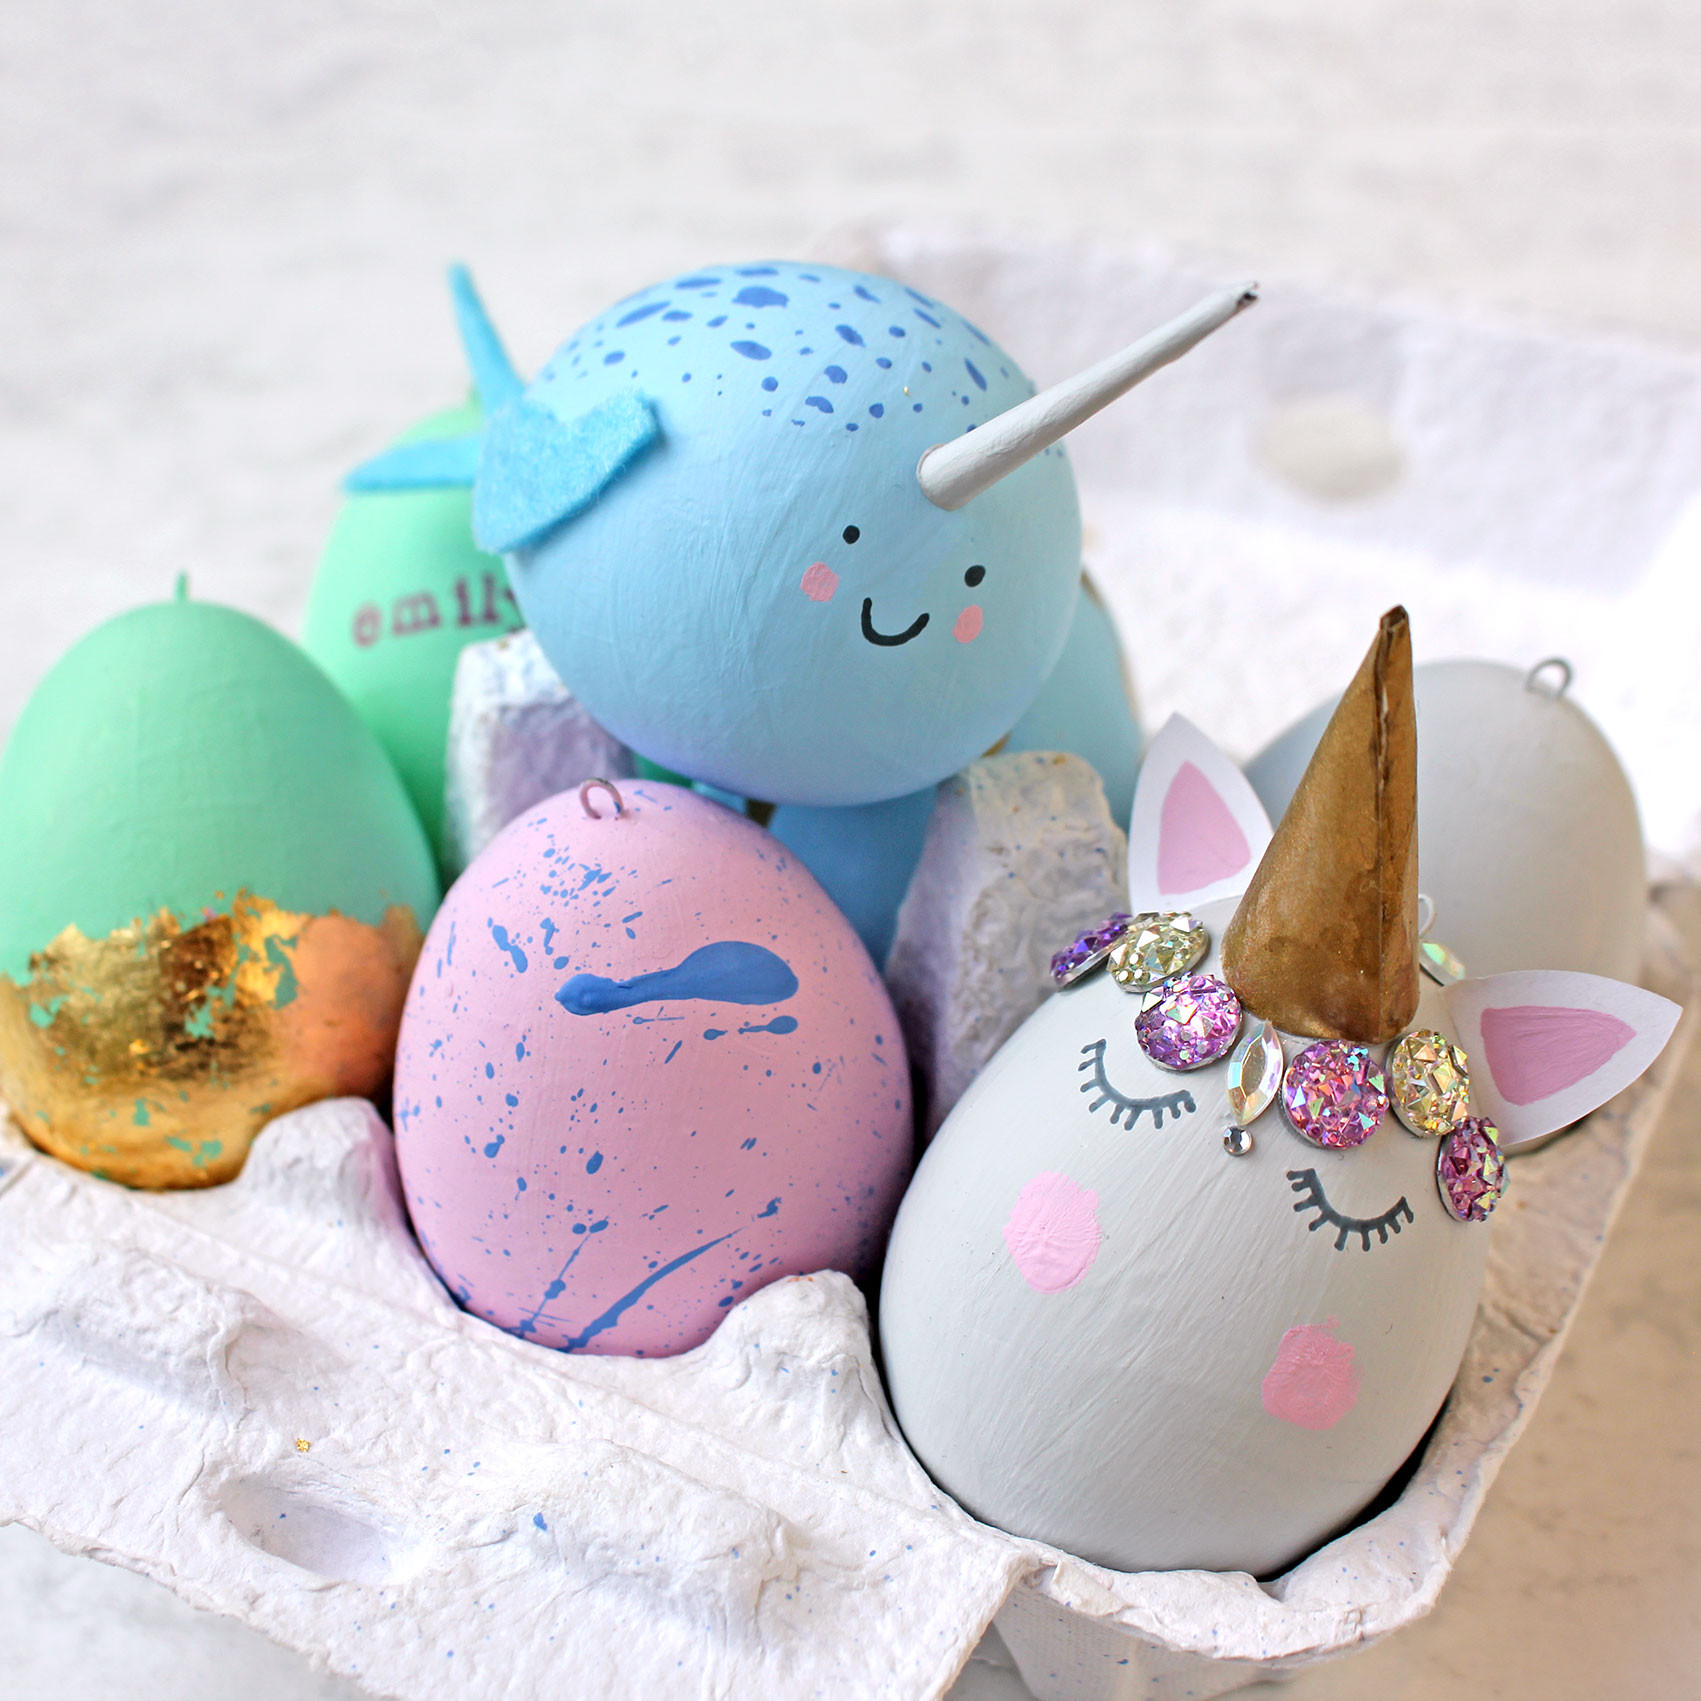 Easter Egg Decorating Ideas
 Paperchase Journal – Wel e to the Paperchase Journal